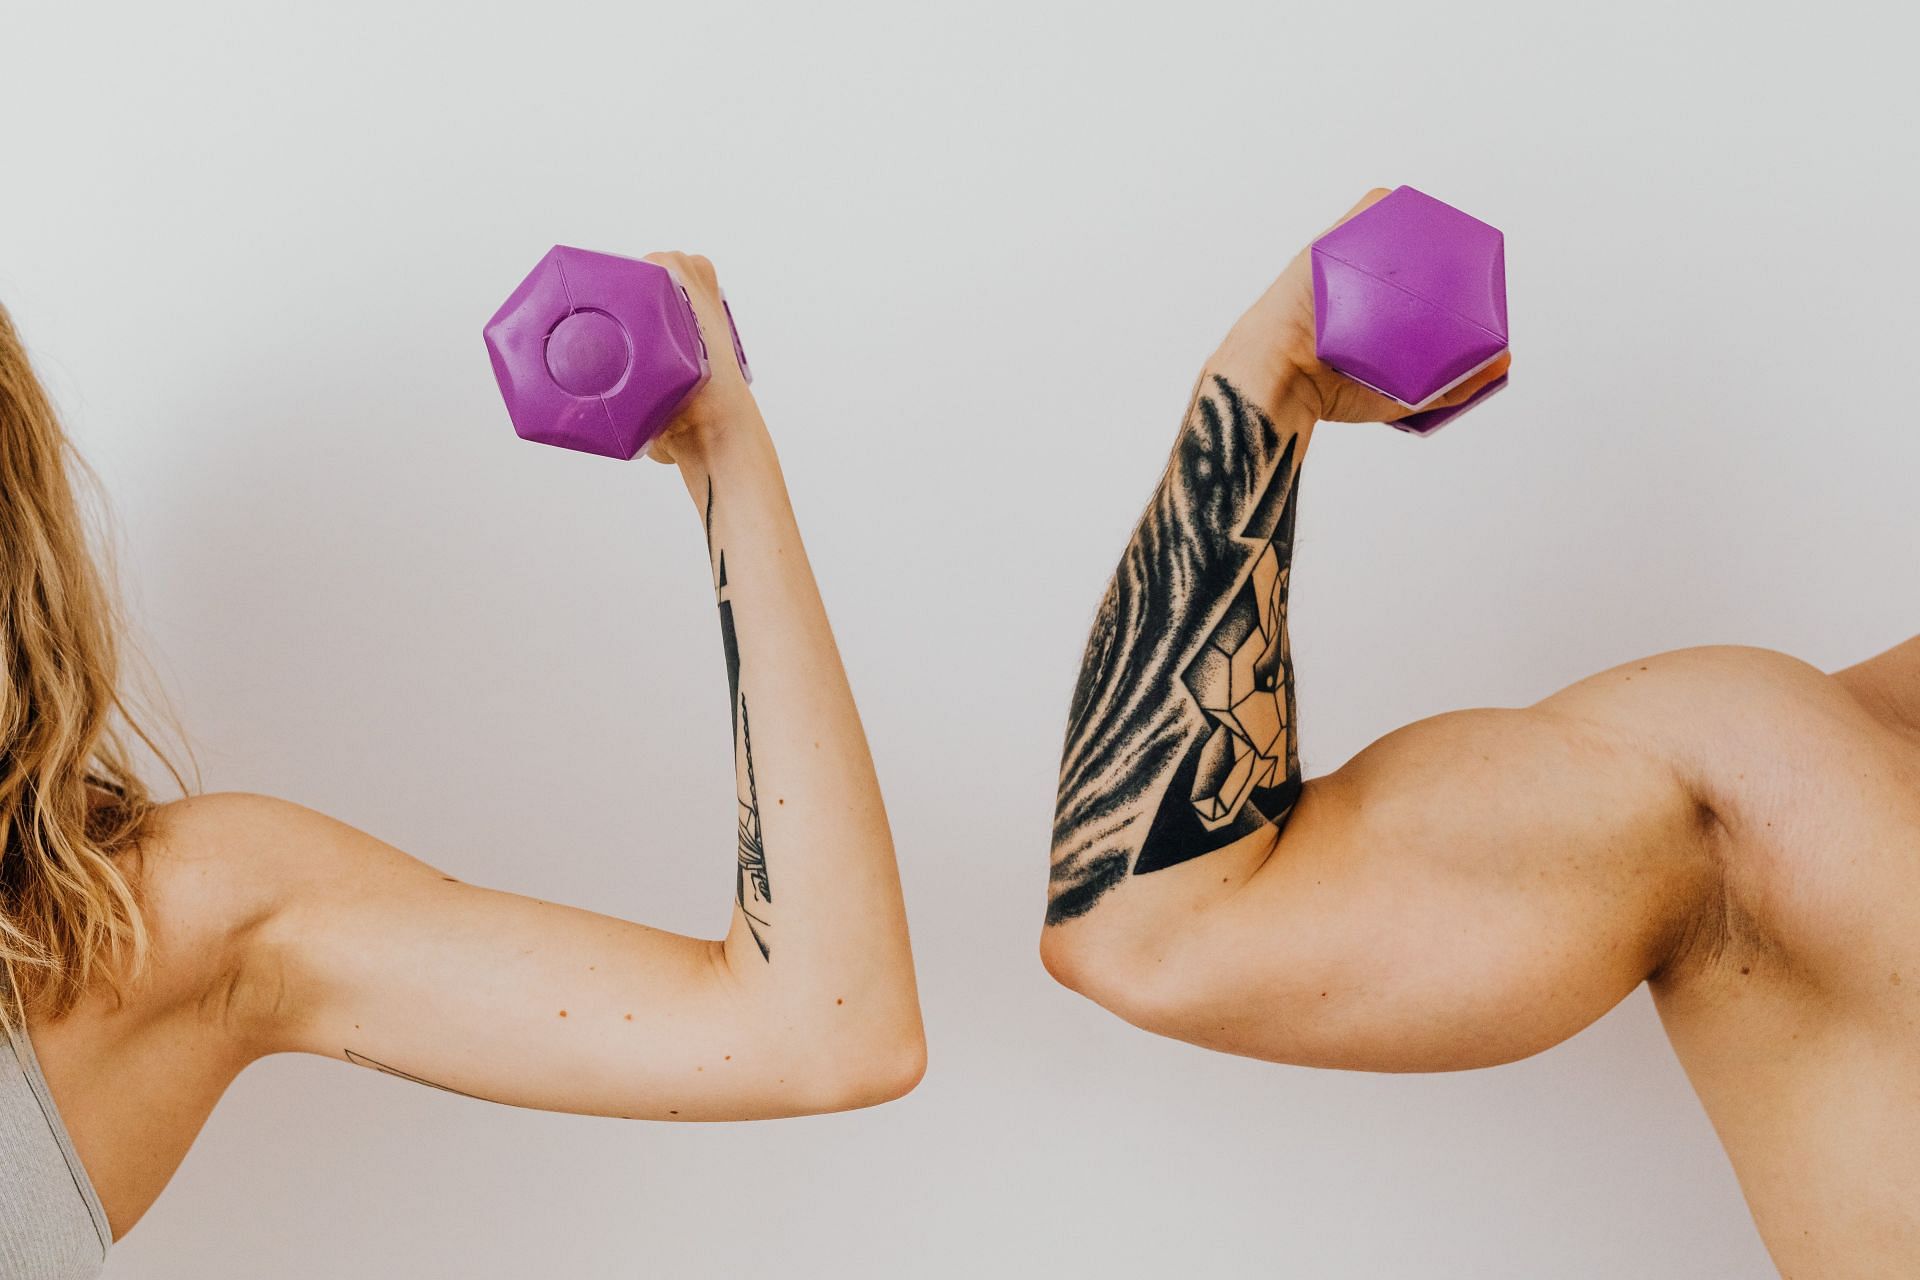 Home workout for biceps can be a great option to get stronger arms. (Image via Pexels/Karolina Grabowska)